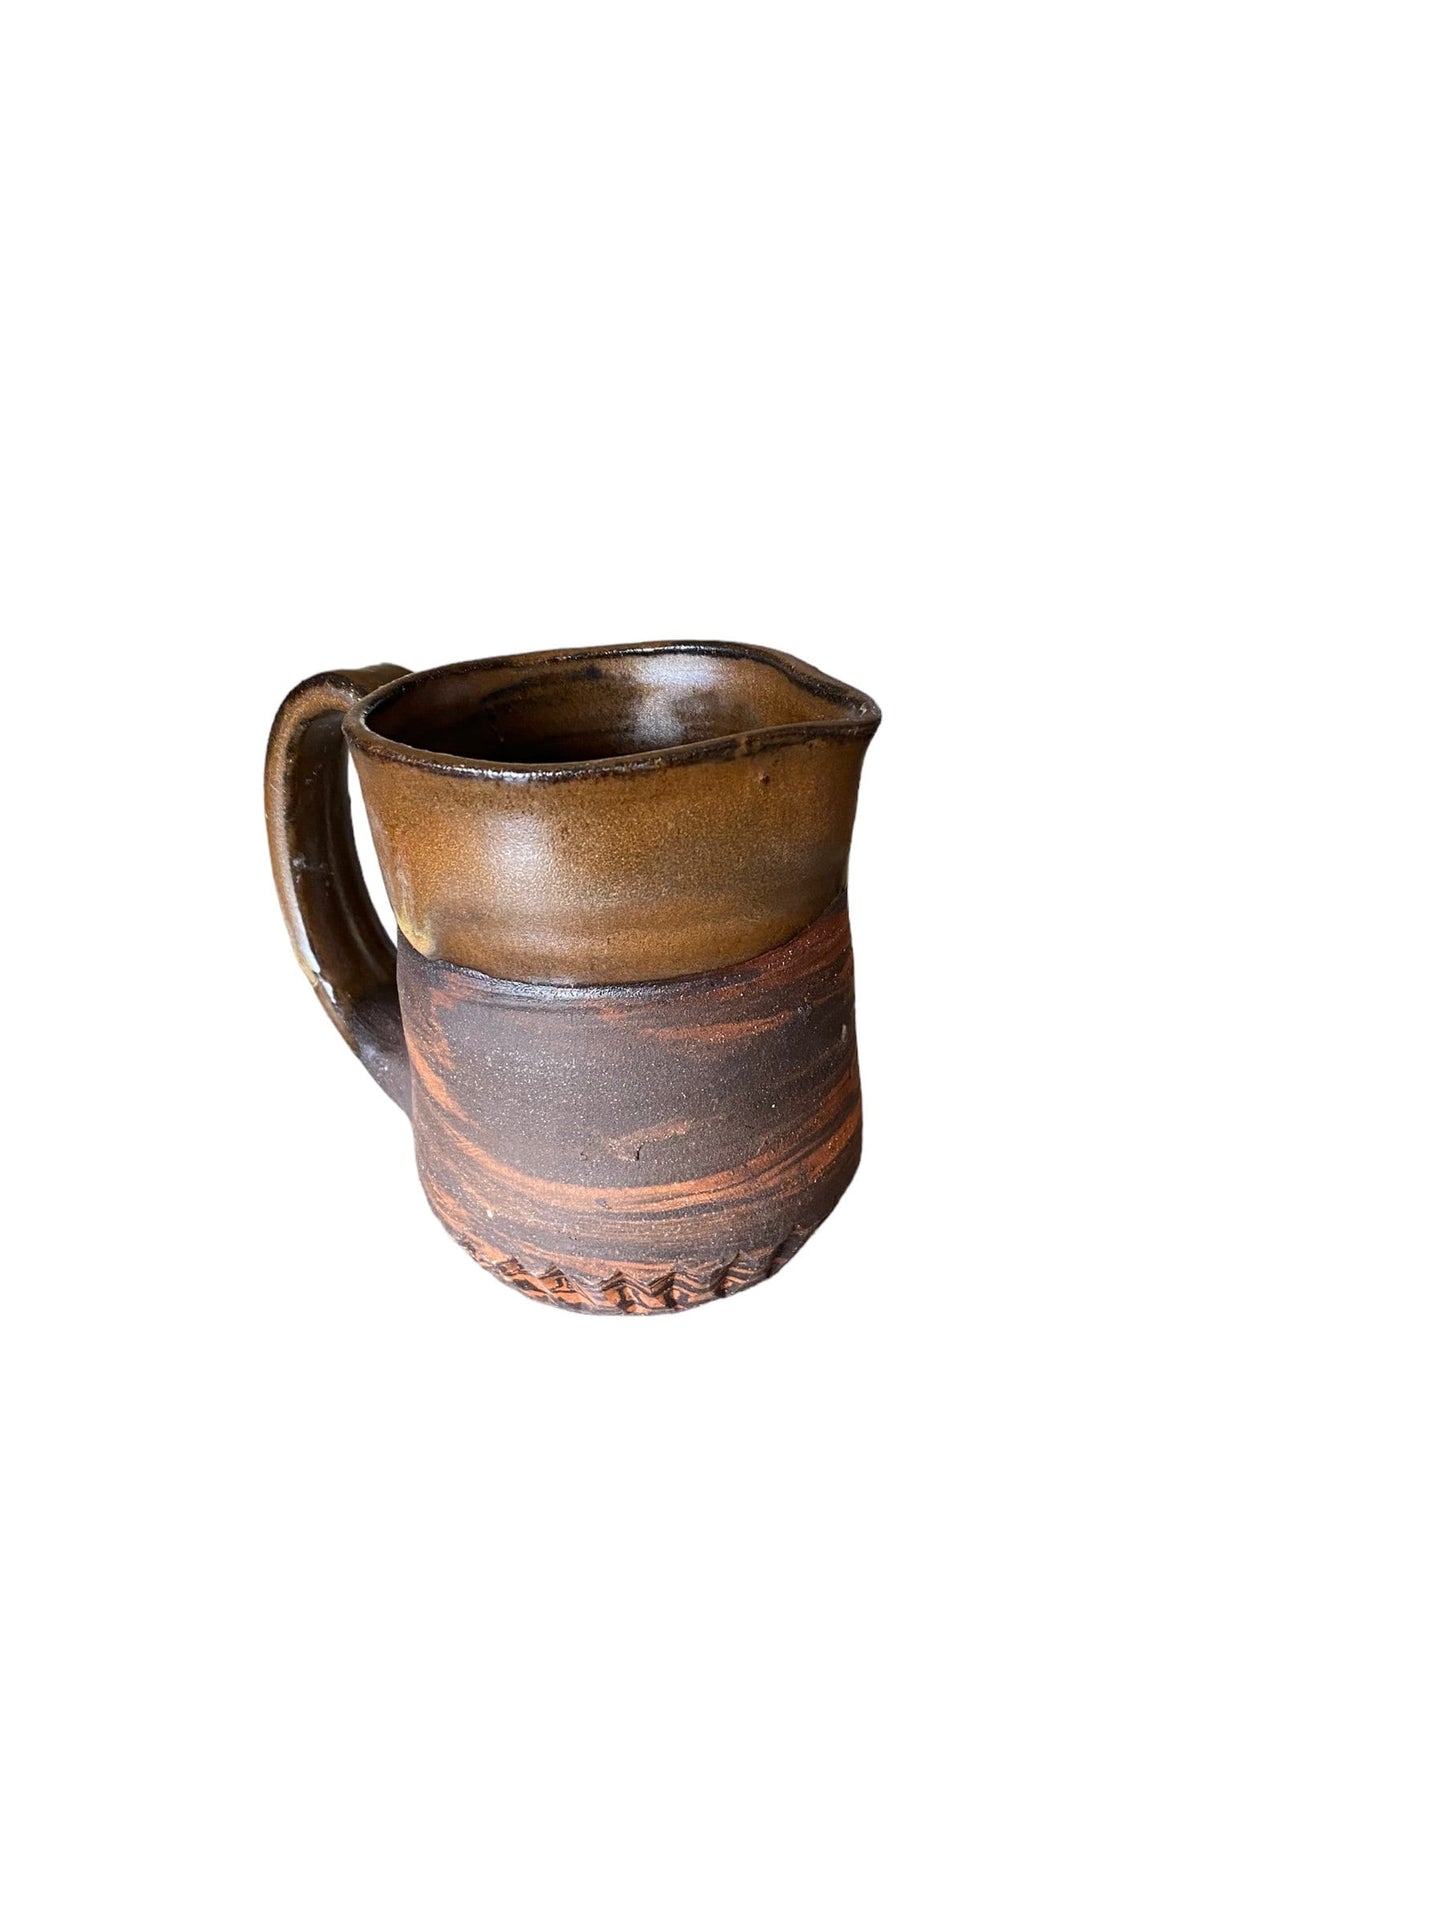 Small 8-Ounce Agateware Creamer: Artisan Crafted Elegance for Your Coffee or Tea Service